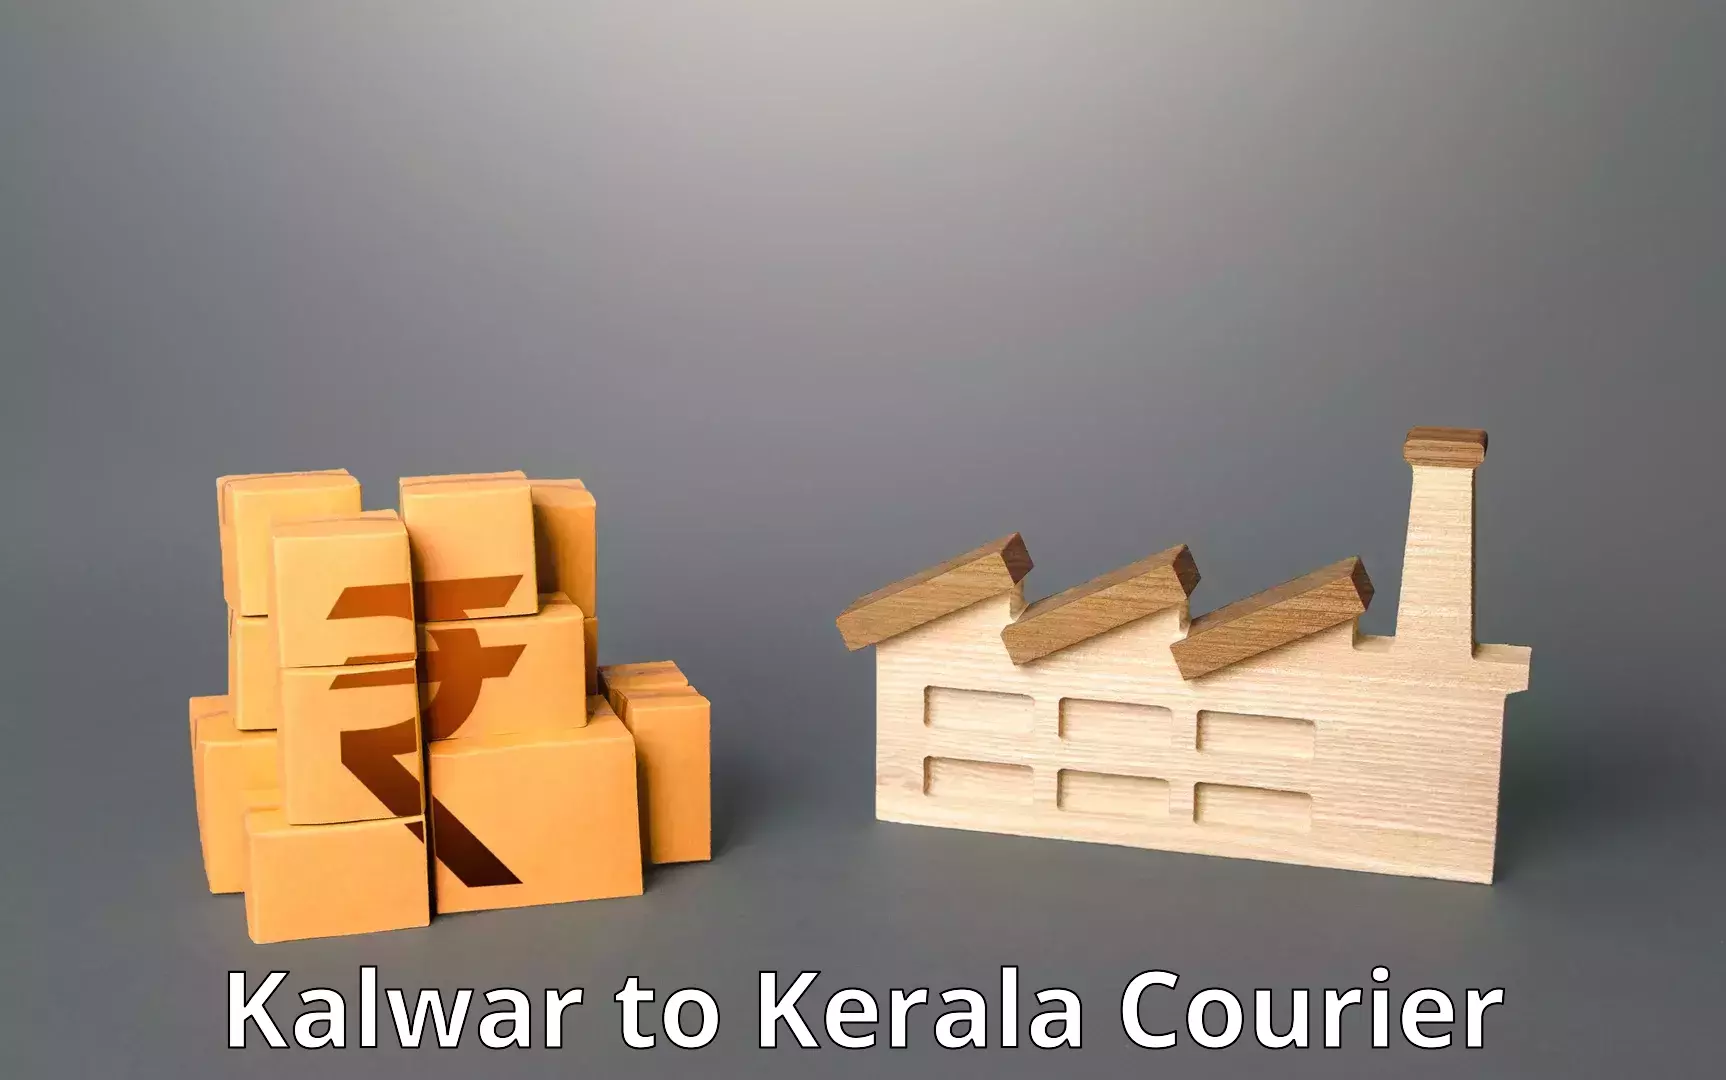 End-to-end delivery Kalwar to Thrissur